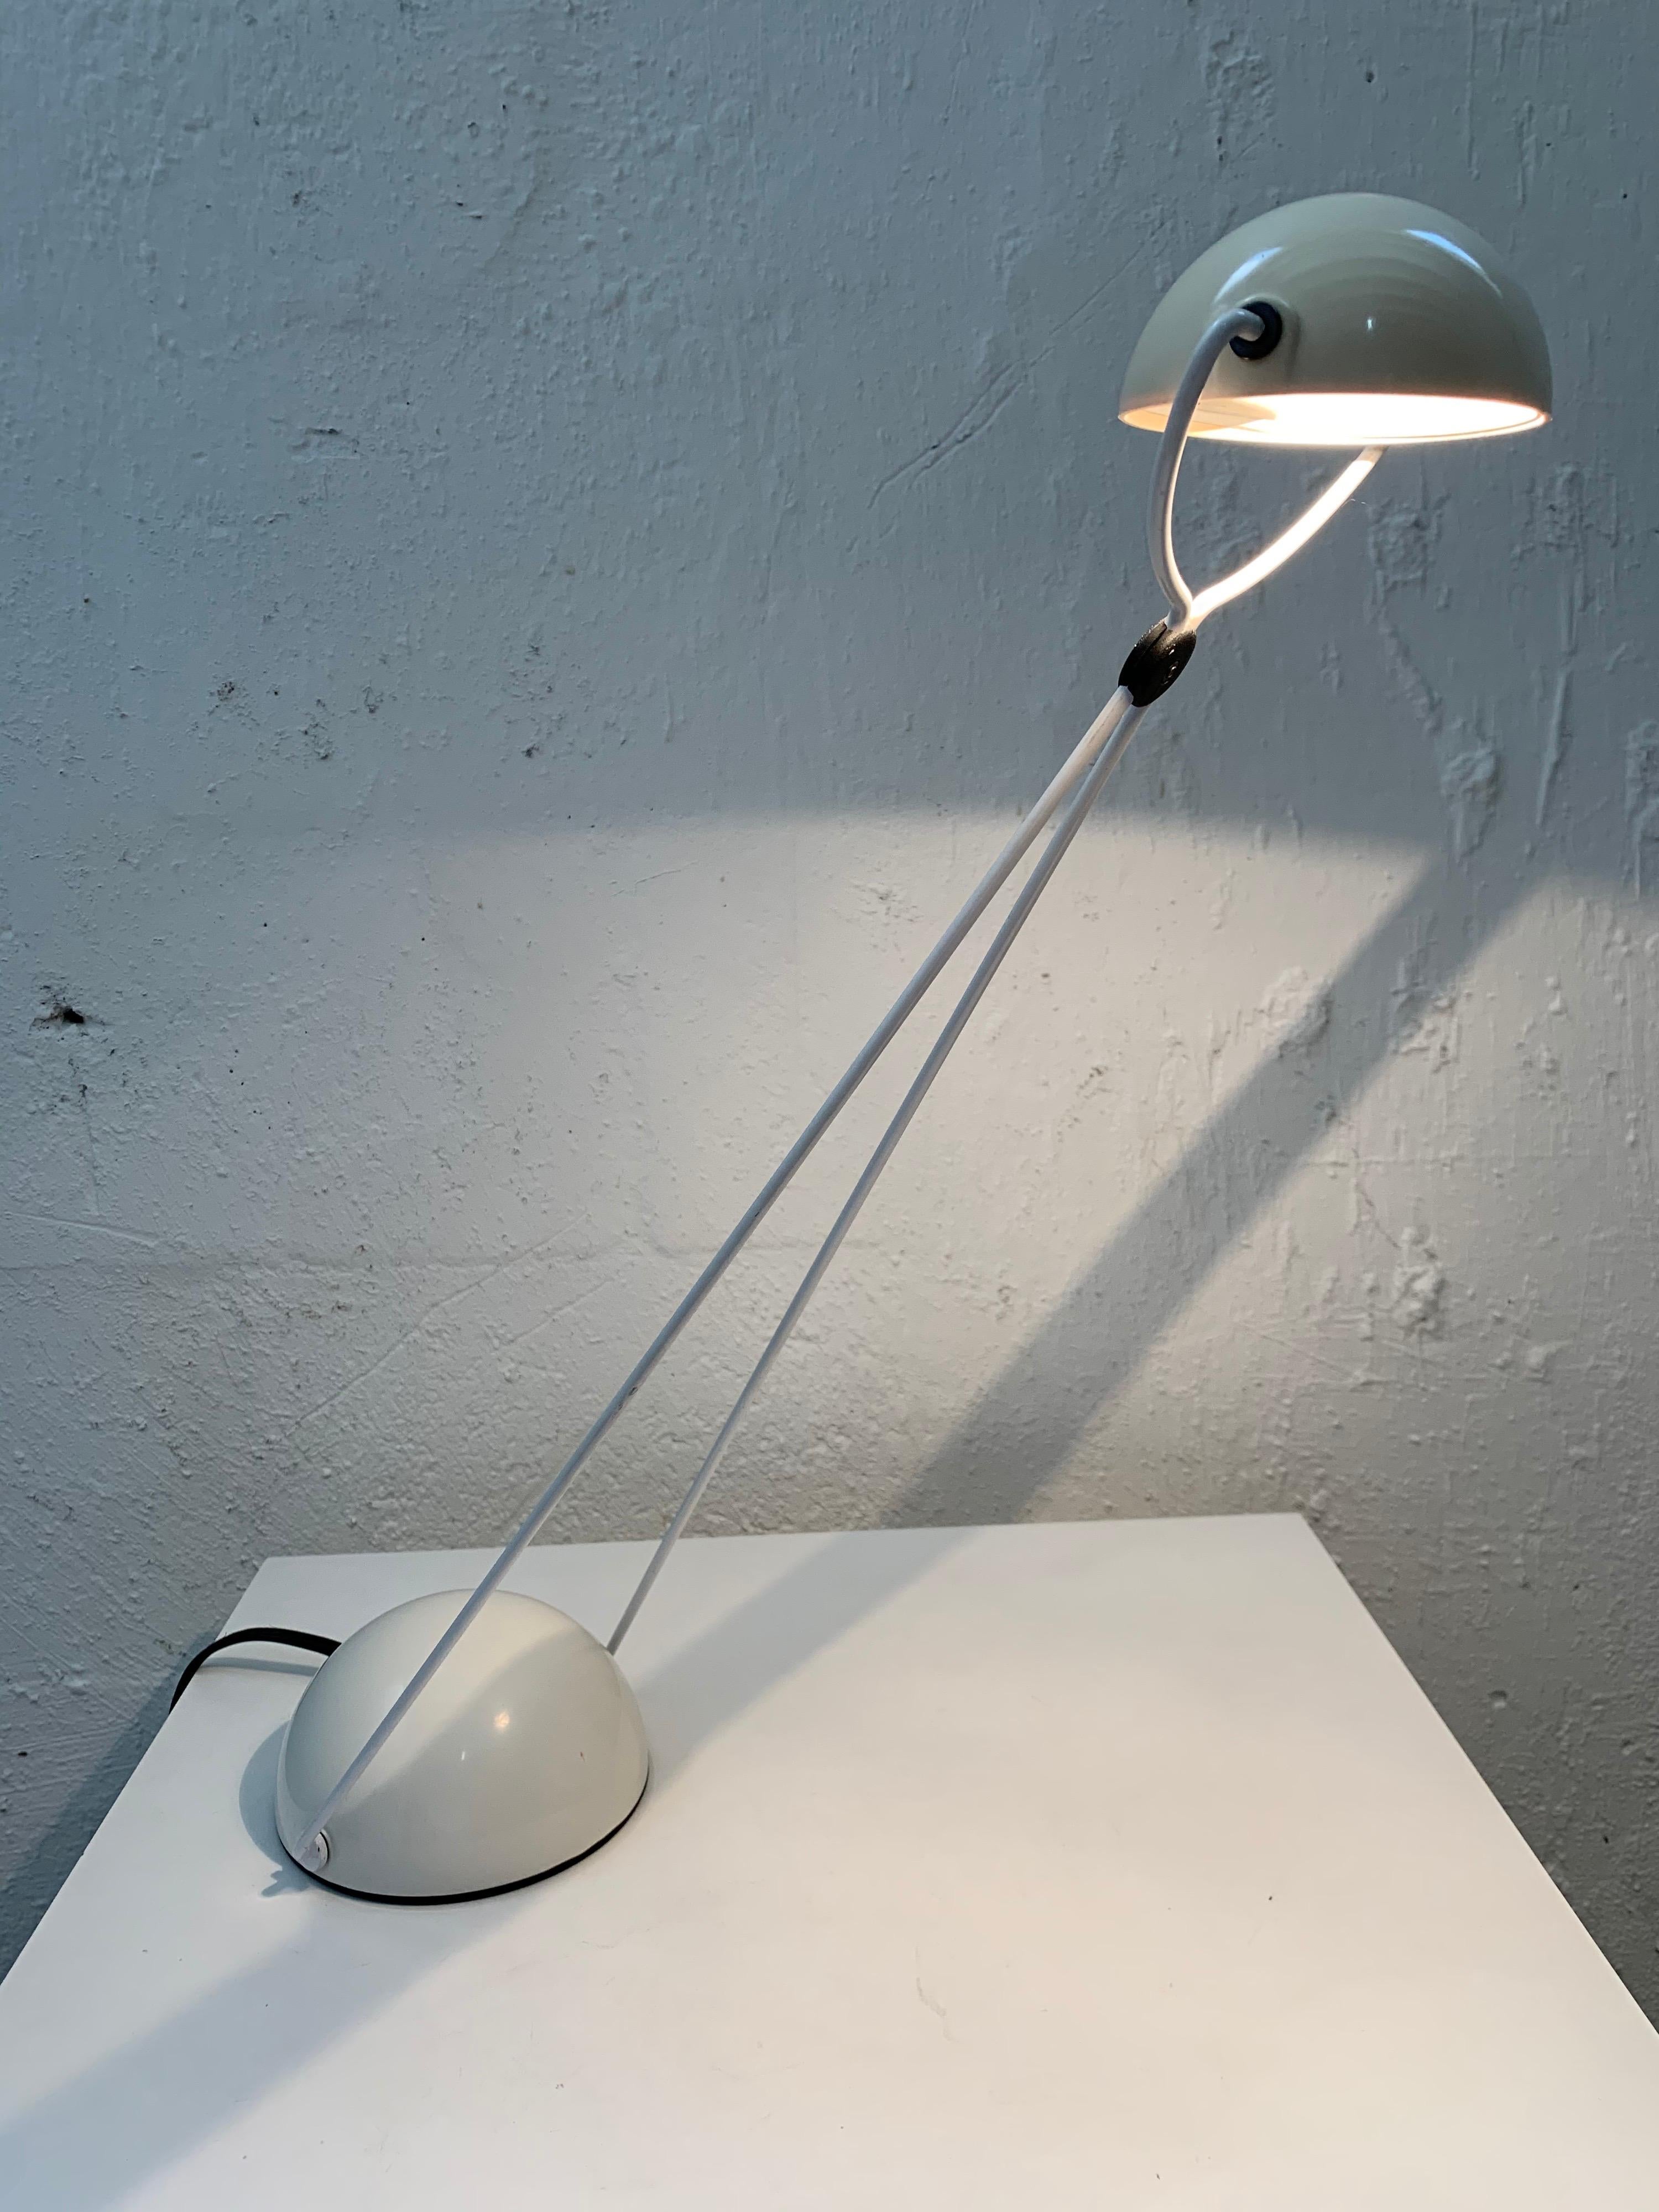 Original early edition Postmodern table desk or task lamp, articulating and adjustable design rendered in creamy off-white plastic and painted steel, designed by Paolo Piva for Stefao Cevoli, Italy, 1980s.